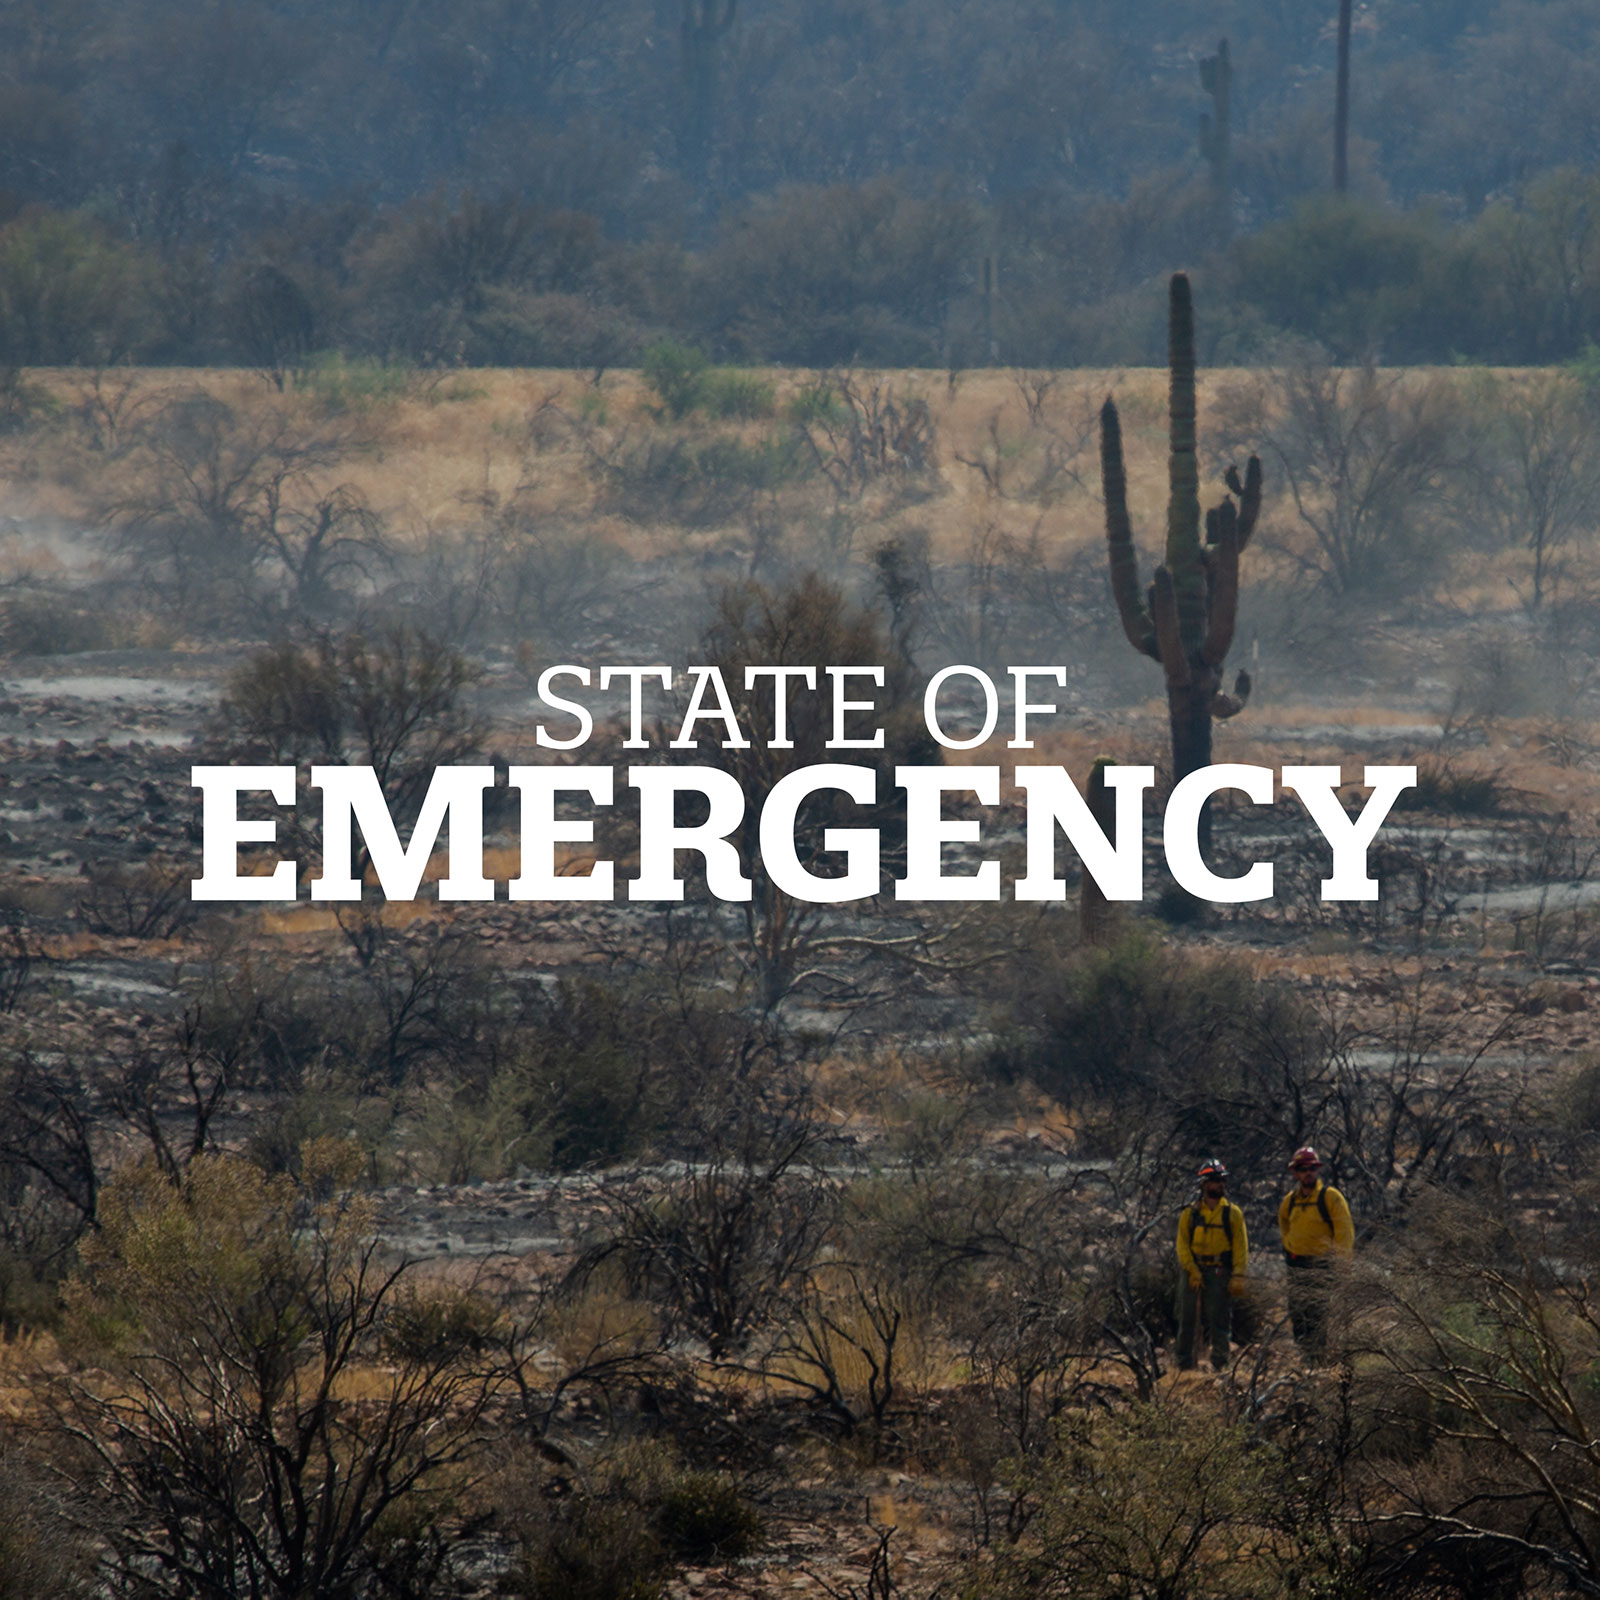 State of Emergency | News21